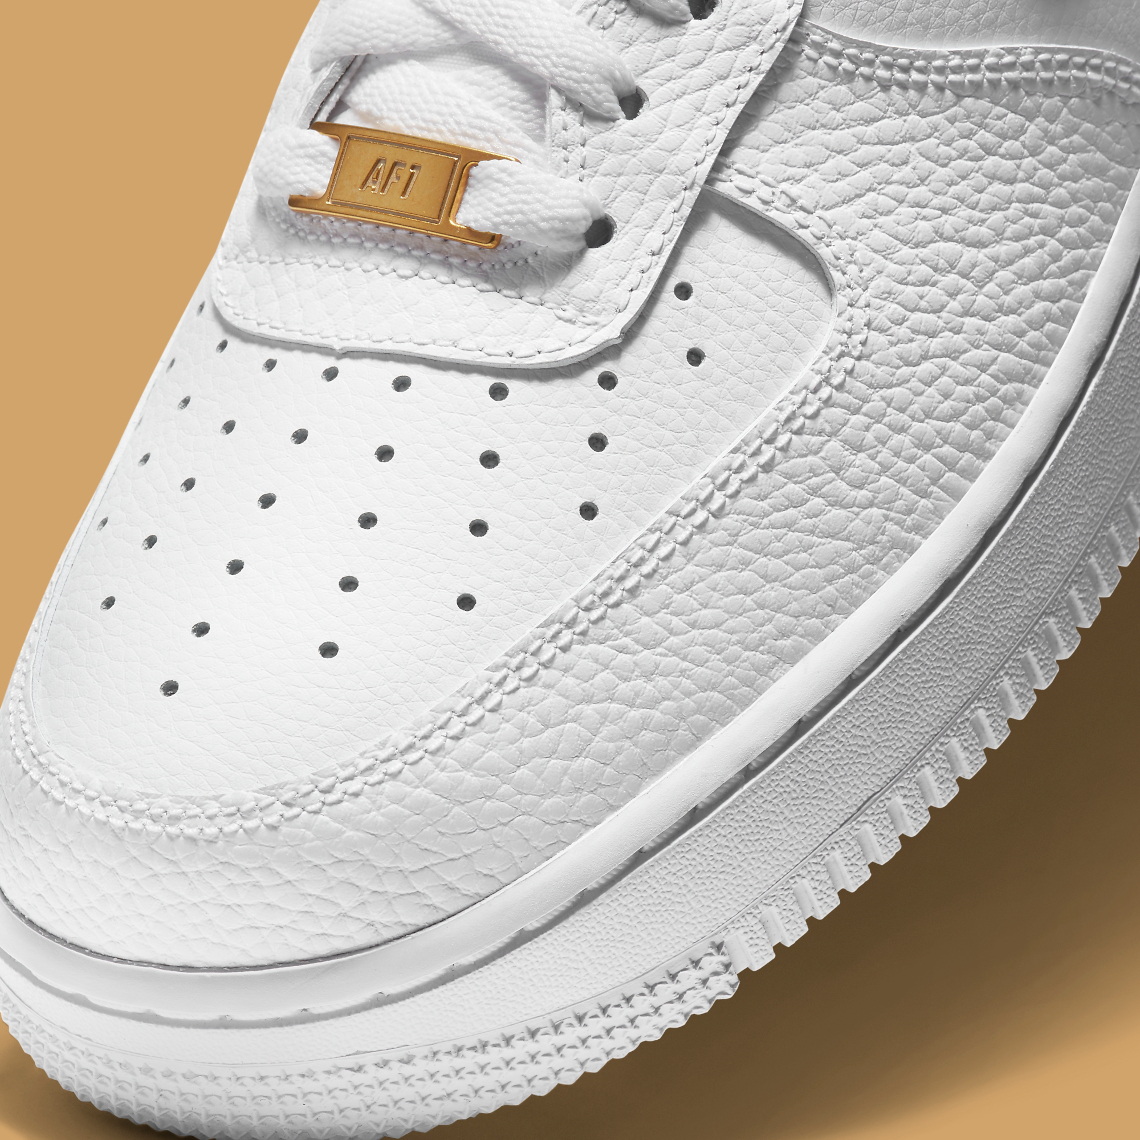 Nike Air Force 1 Low White Cz0326 101 Release